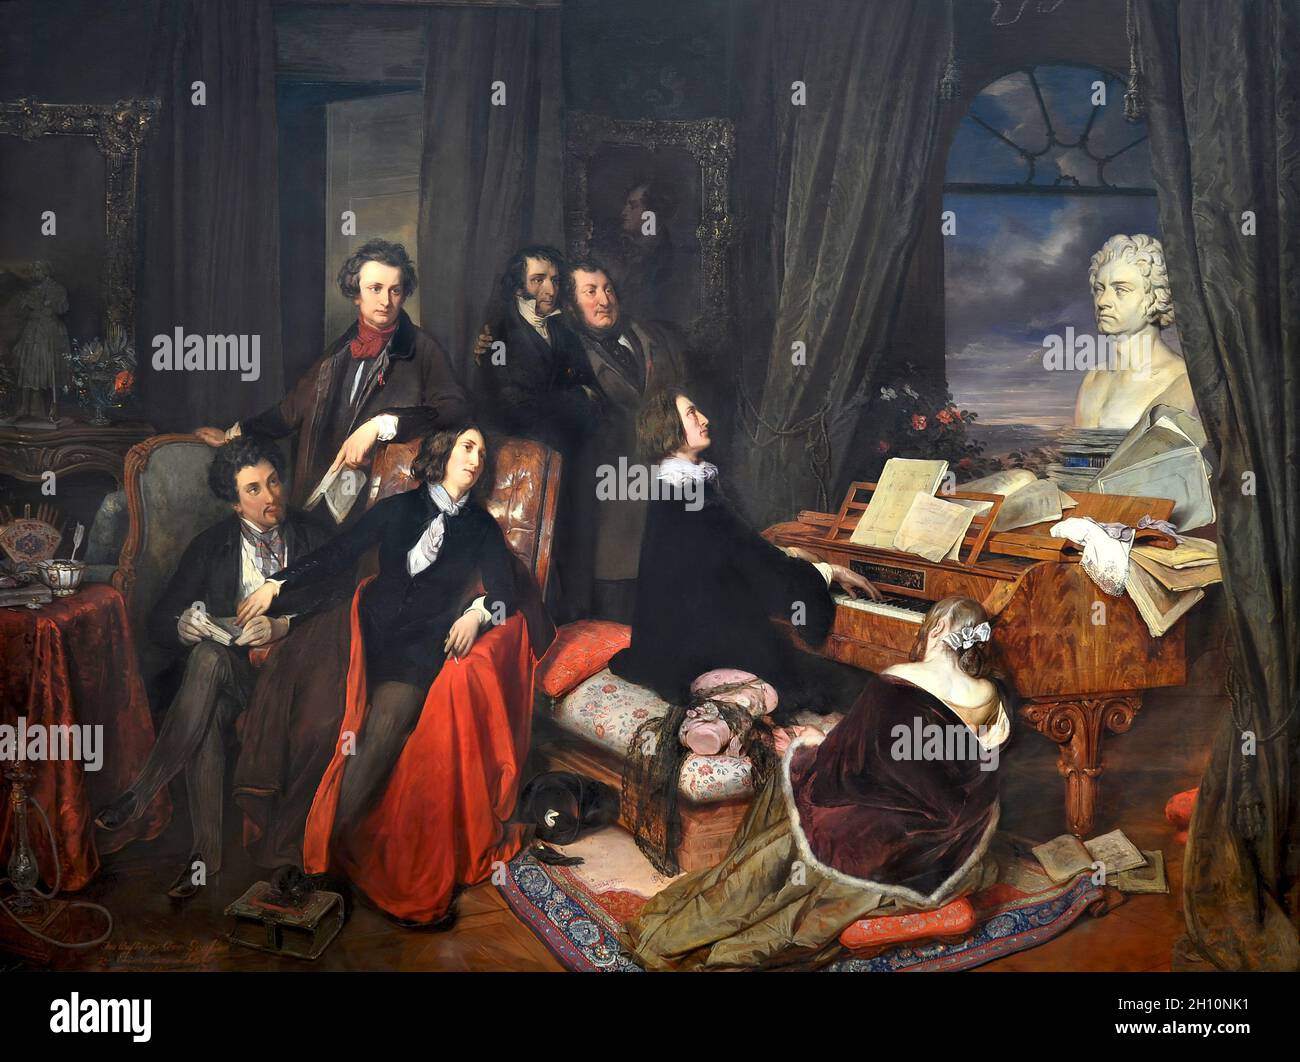 Franz Liszt at the Piano, by Josef Danhauser, 1840, with Alfred de Musset or Alexandre Dumas père, George Sand, Marie d'Agoult, Hector Berlioz or Victor Hugo; Niccolò Paganini, Gioachino Rossini, digitally optimized Stock Photo